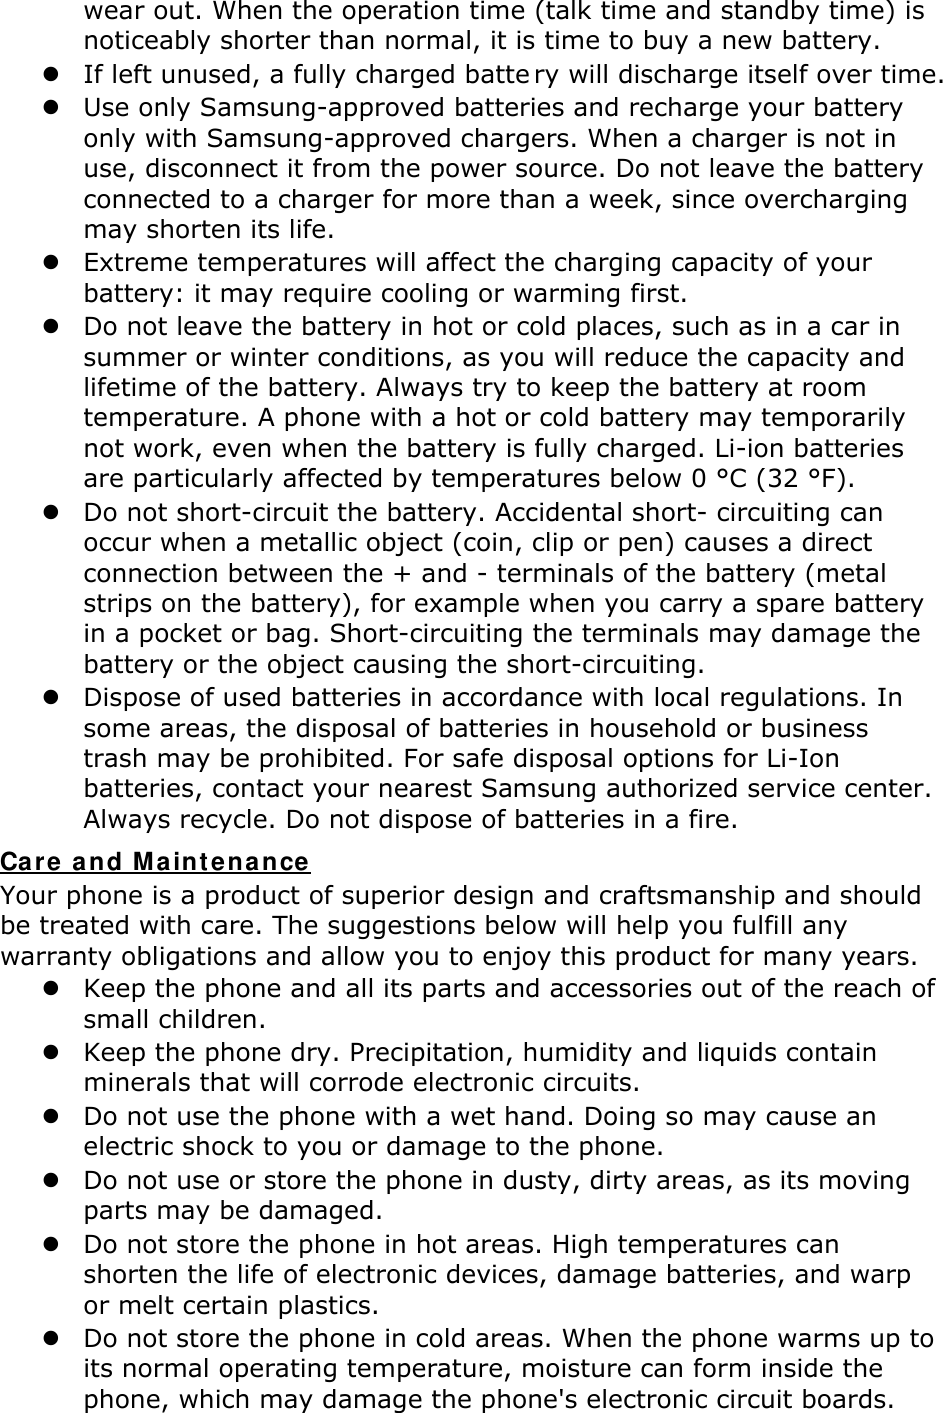 wear out. When the operation time (talk time and standby time) is noticeably shorter than normal, it is time to buy a new battery.  If left unused, a fully charged batte ry will discharge itself over time.   Use only Samsung-approved batteries and recharge your battery only with Samsung-approved chargers. When a charger is not in use, disconnect it from the power source. Do not leave the battery connected to a charger for more than a week, since overcharging may shorten its life.  Extreme temperatures will affect the charging capacity of your battery: it may require cooling or warming first.  Do not leave the battery in hot or cold places, such as in a car in summer or winter conditions, as you will reduce the capacity and lifetime of the battery. Always try to keep the battery at room temperature. A phone with a hot or cold battery may temporarily not work, even when the battery is fully charged. Li-ion batteries are particularly affected by temperatures below 0 °C (32 °F).  Do not short-circuit the battery. Accidental short- circuiting can occur when a metallic object (coin, clip or pen) causes a direct connection between the + and - terminals of the battery (metal strips on the battery), for example when you carry a spare battery in a pocket or bag. Short-circuiting the terminals may damage the battery or the object causing the short-circuiting.  Dispose of used batteries in accordance with local regulations. In some areas, the disposal of batteries in household or business trash may be prohibited. For safe disposal options for Li-Ion batteries, contact your nearest Samsung authorized service center. Always recycle. Do not dispose of batteries in a fire. UCare and Maintenance Your phone is a product of superior design and craftsmanship and should be treated with care. The suggestions below will help you fulfill any warranty obligations and allow you to enjoy this product for many years.  Keep the phone and all its parts and accessories out of the reach of small children.  Keep the phone dry. Precipitation, humidity and liquids contain minerals that will corrode electronic circuits.  Do not use the phone with a wet hand. Doing so may cause an electric shock to you or damage to the phone.  Do not use or store the phone in dusty, dirty areas, as its moving parts may be damaged.  Do not store the phone in hot areas. High temperatures can shorten the life of electronic devices, damage batteries, and warp or melt certain plastics.  Do not store the phone in cold areas. When the phone warms up to its normal operating temperature, moisture can form inside the phone, which may damage the phone&apos;s electronic circuit boards. 